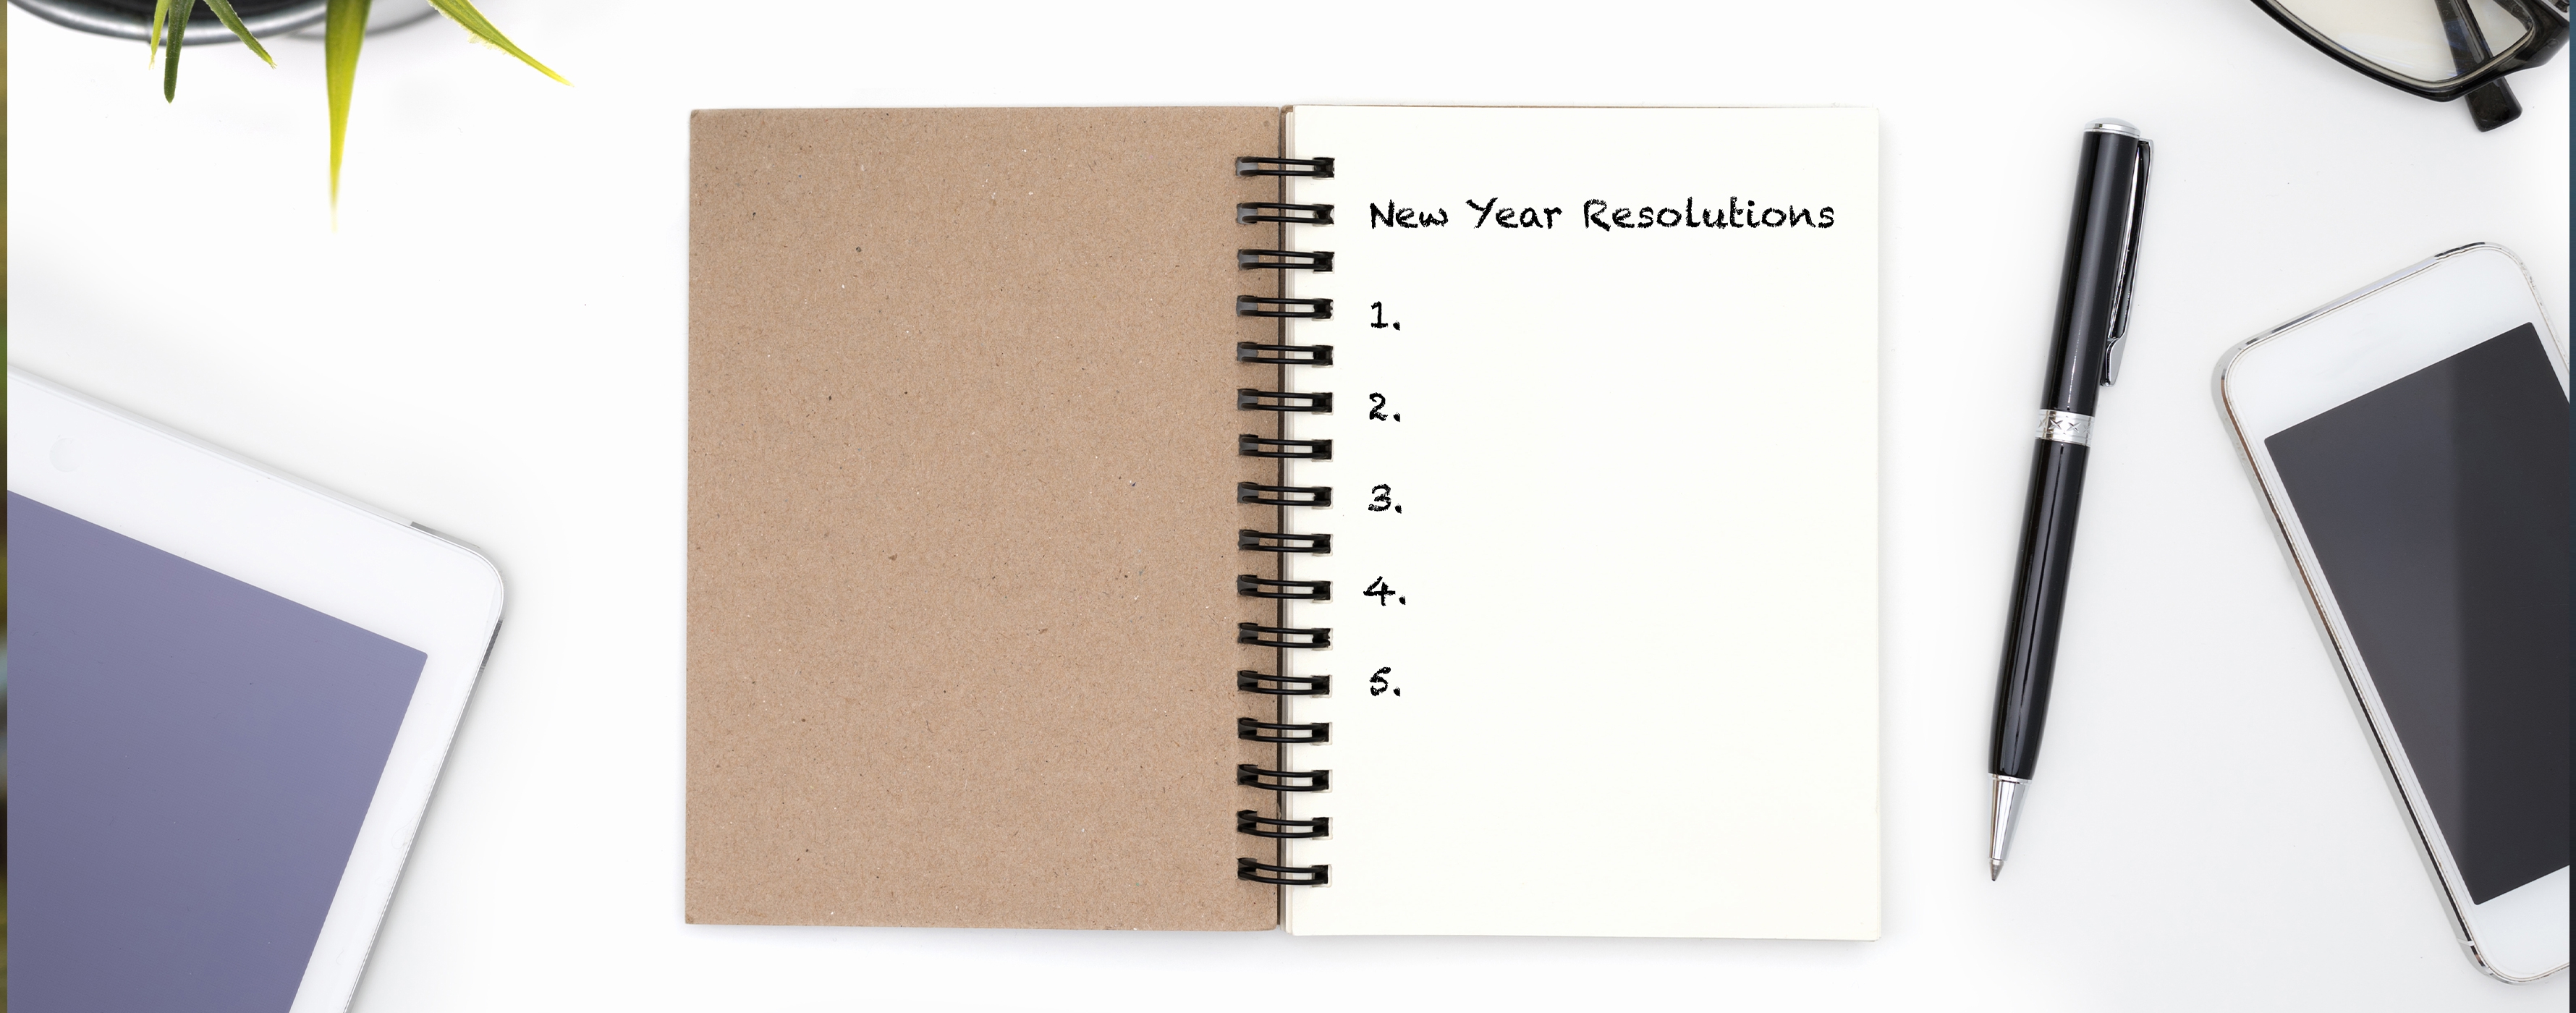 Top 5 Financial Resolutions for the New Year